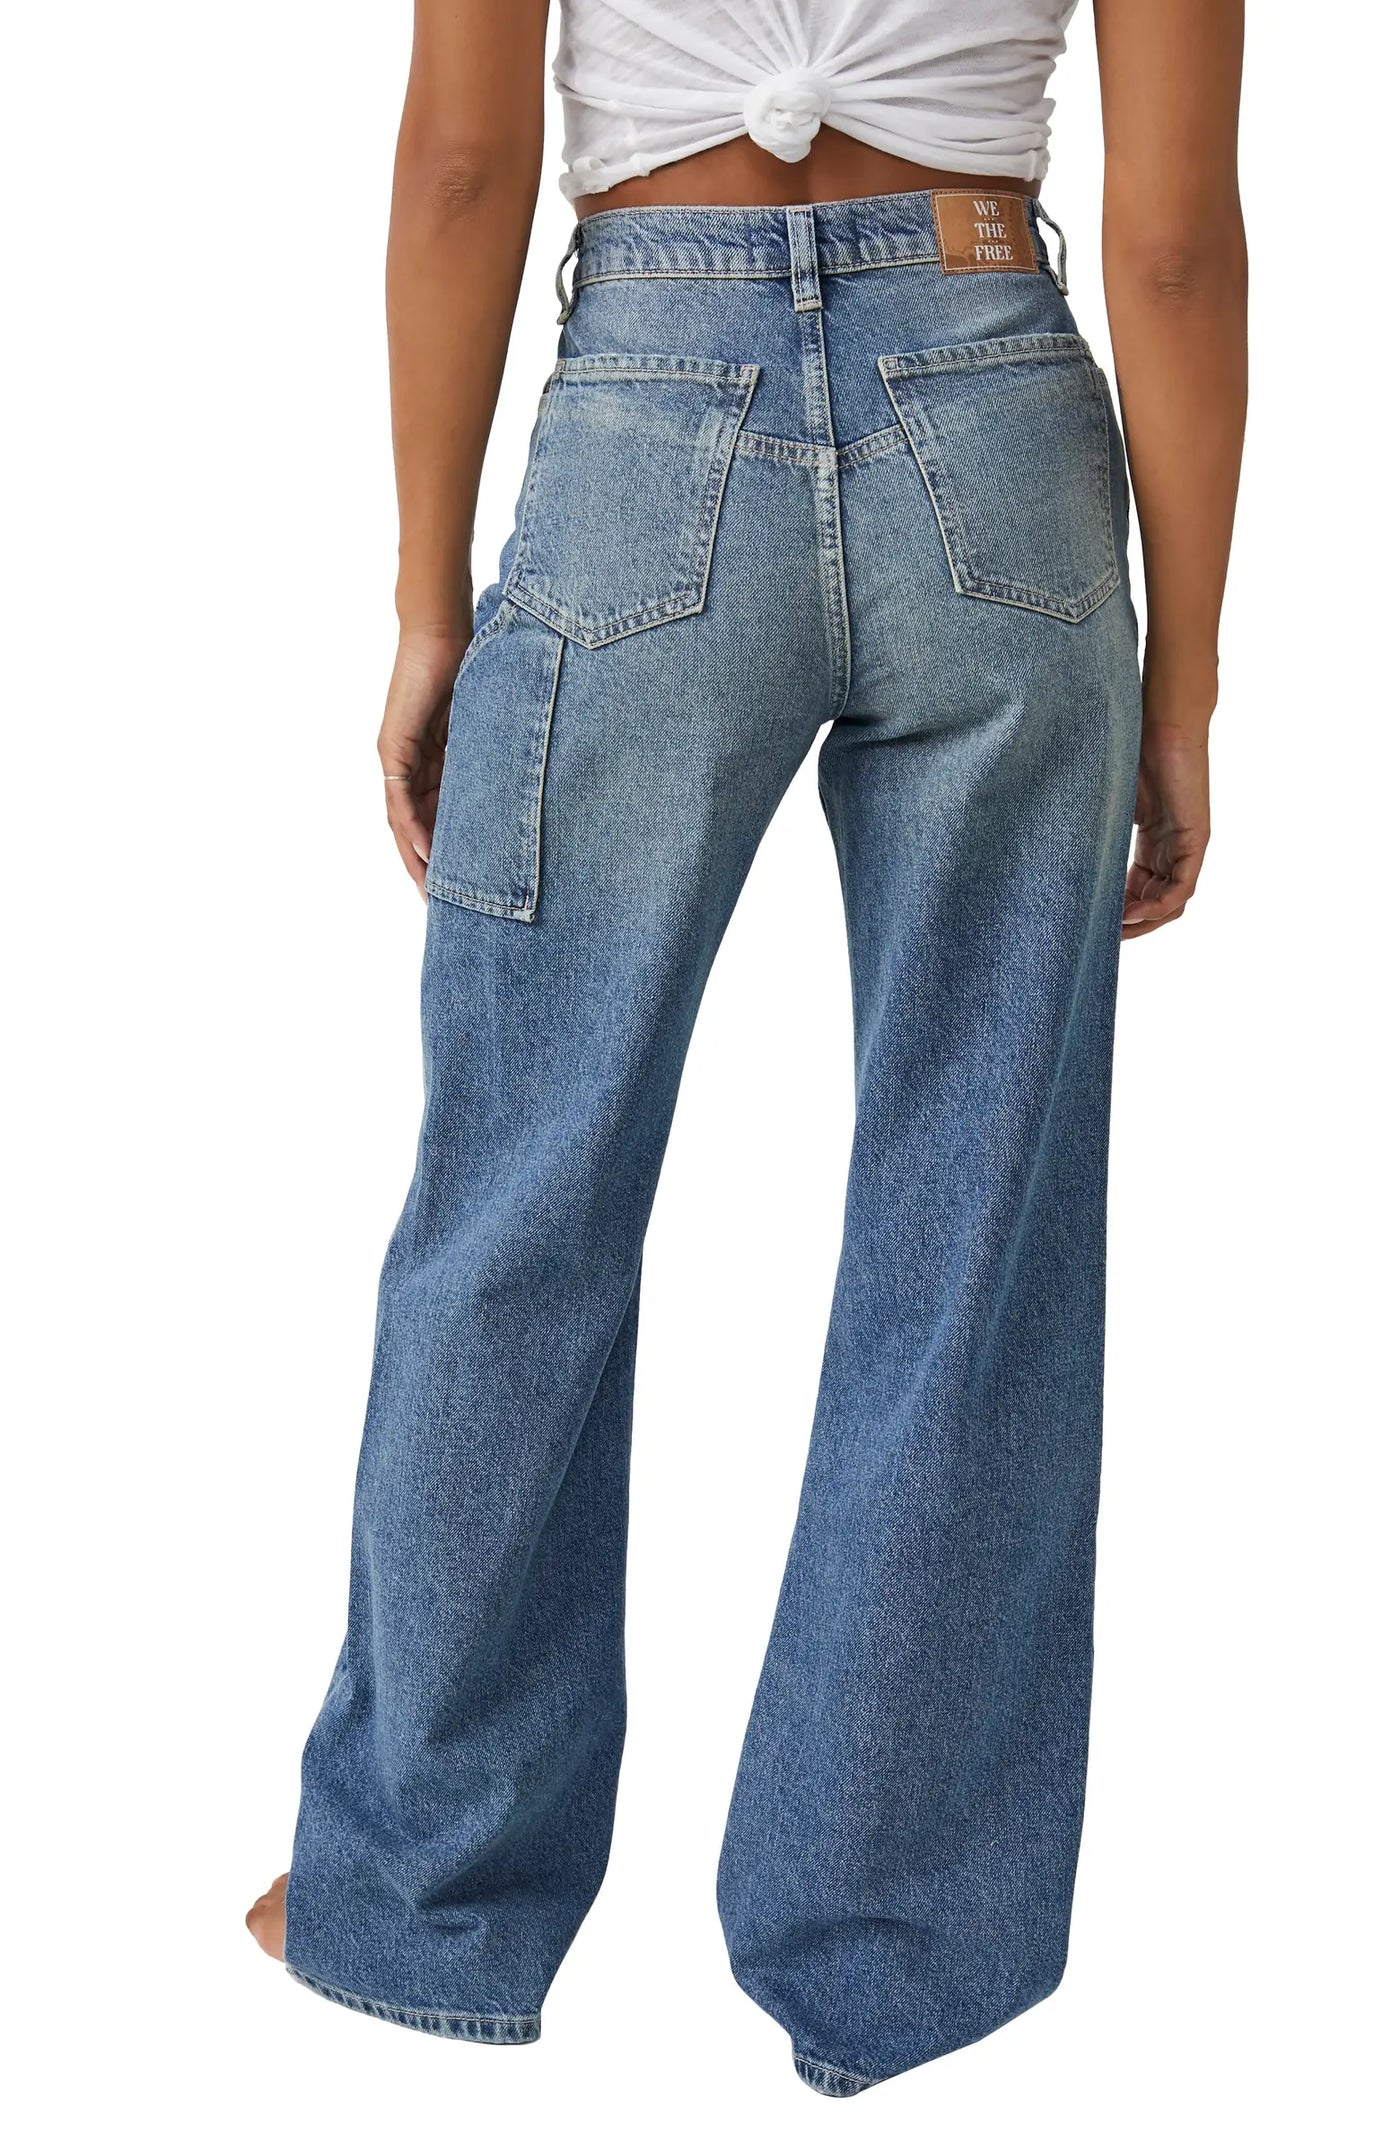 Tinsley Baggy High Rise Jeans - Madison's Niche 